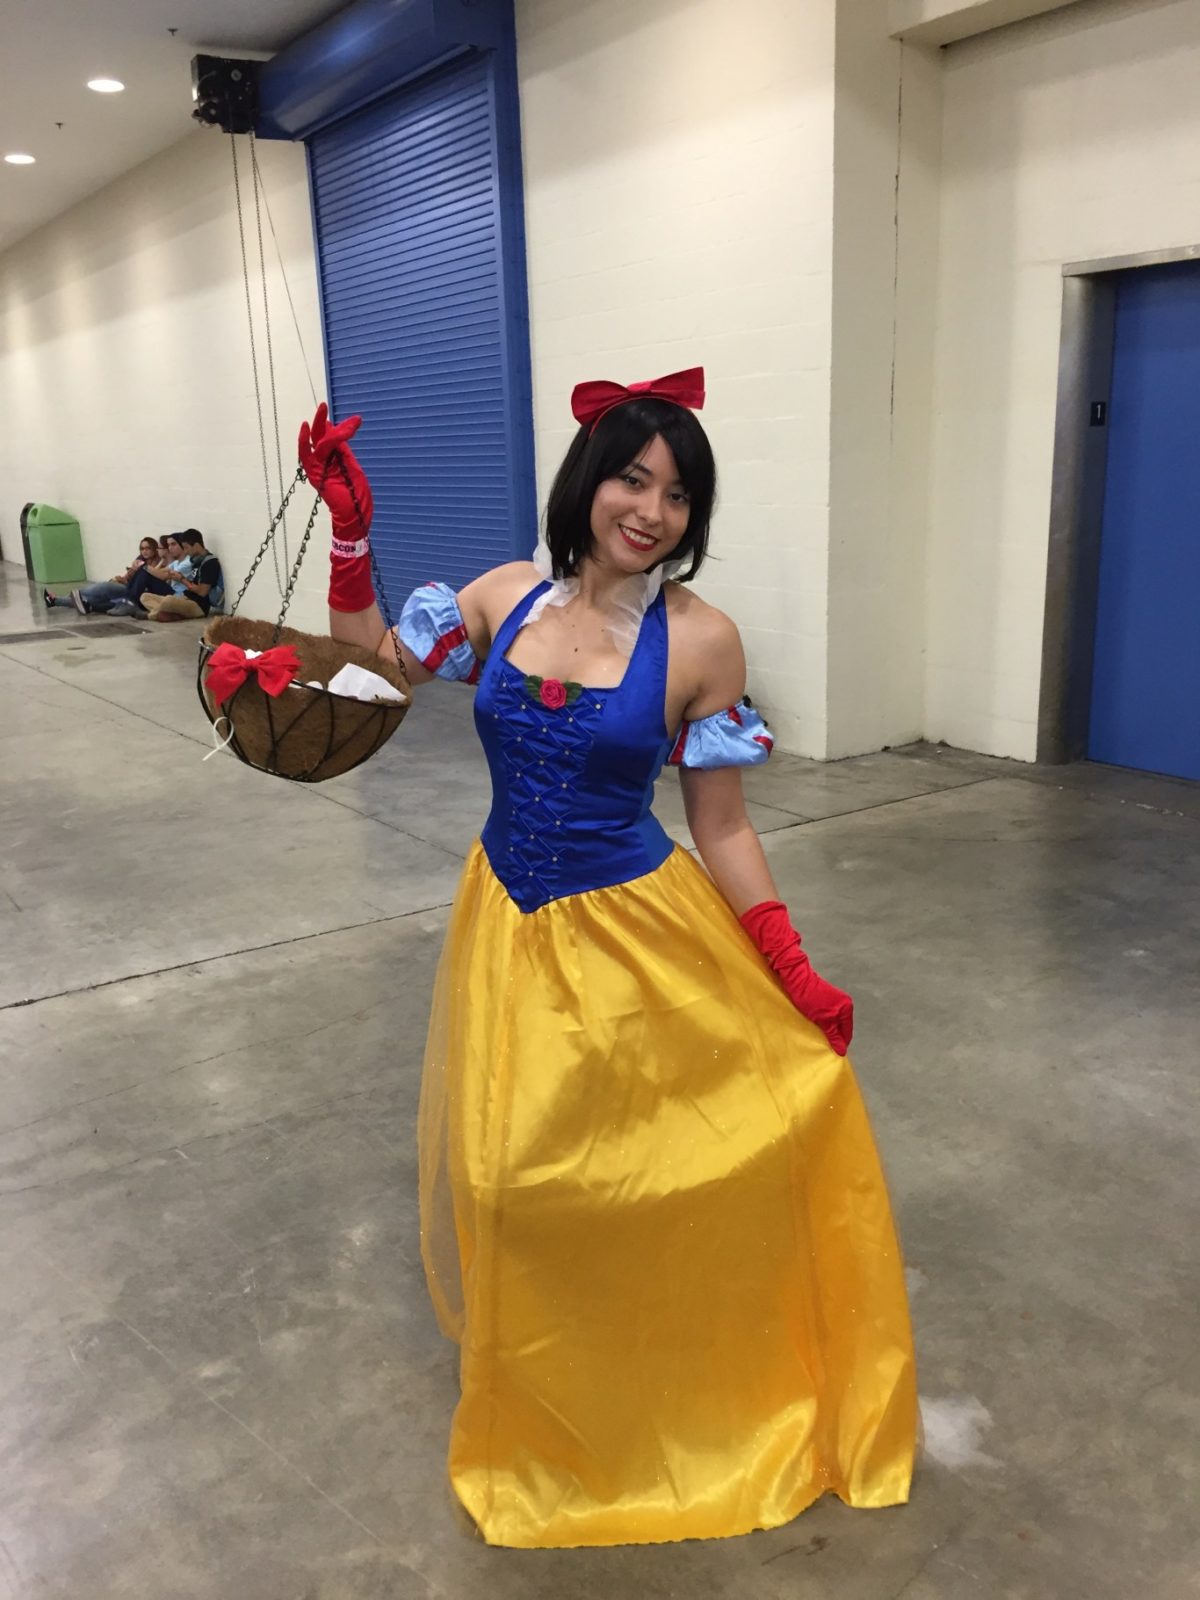 CosView Halloween Marathon:: Snow White never looked so Good but who was she?